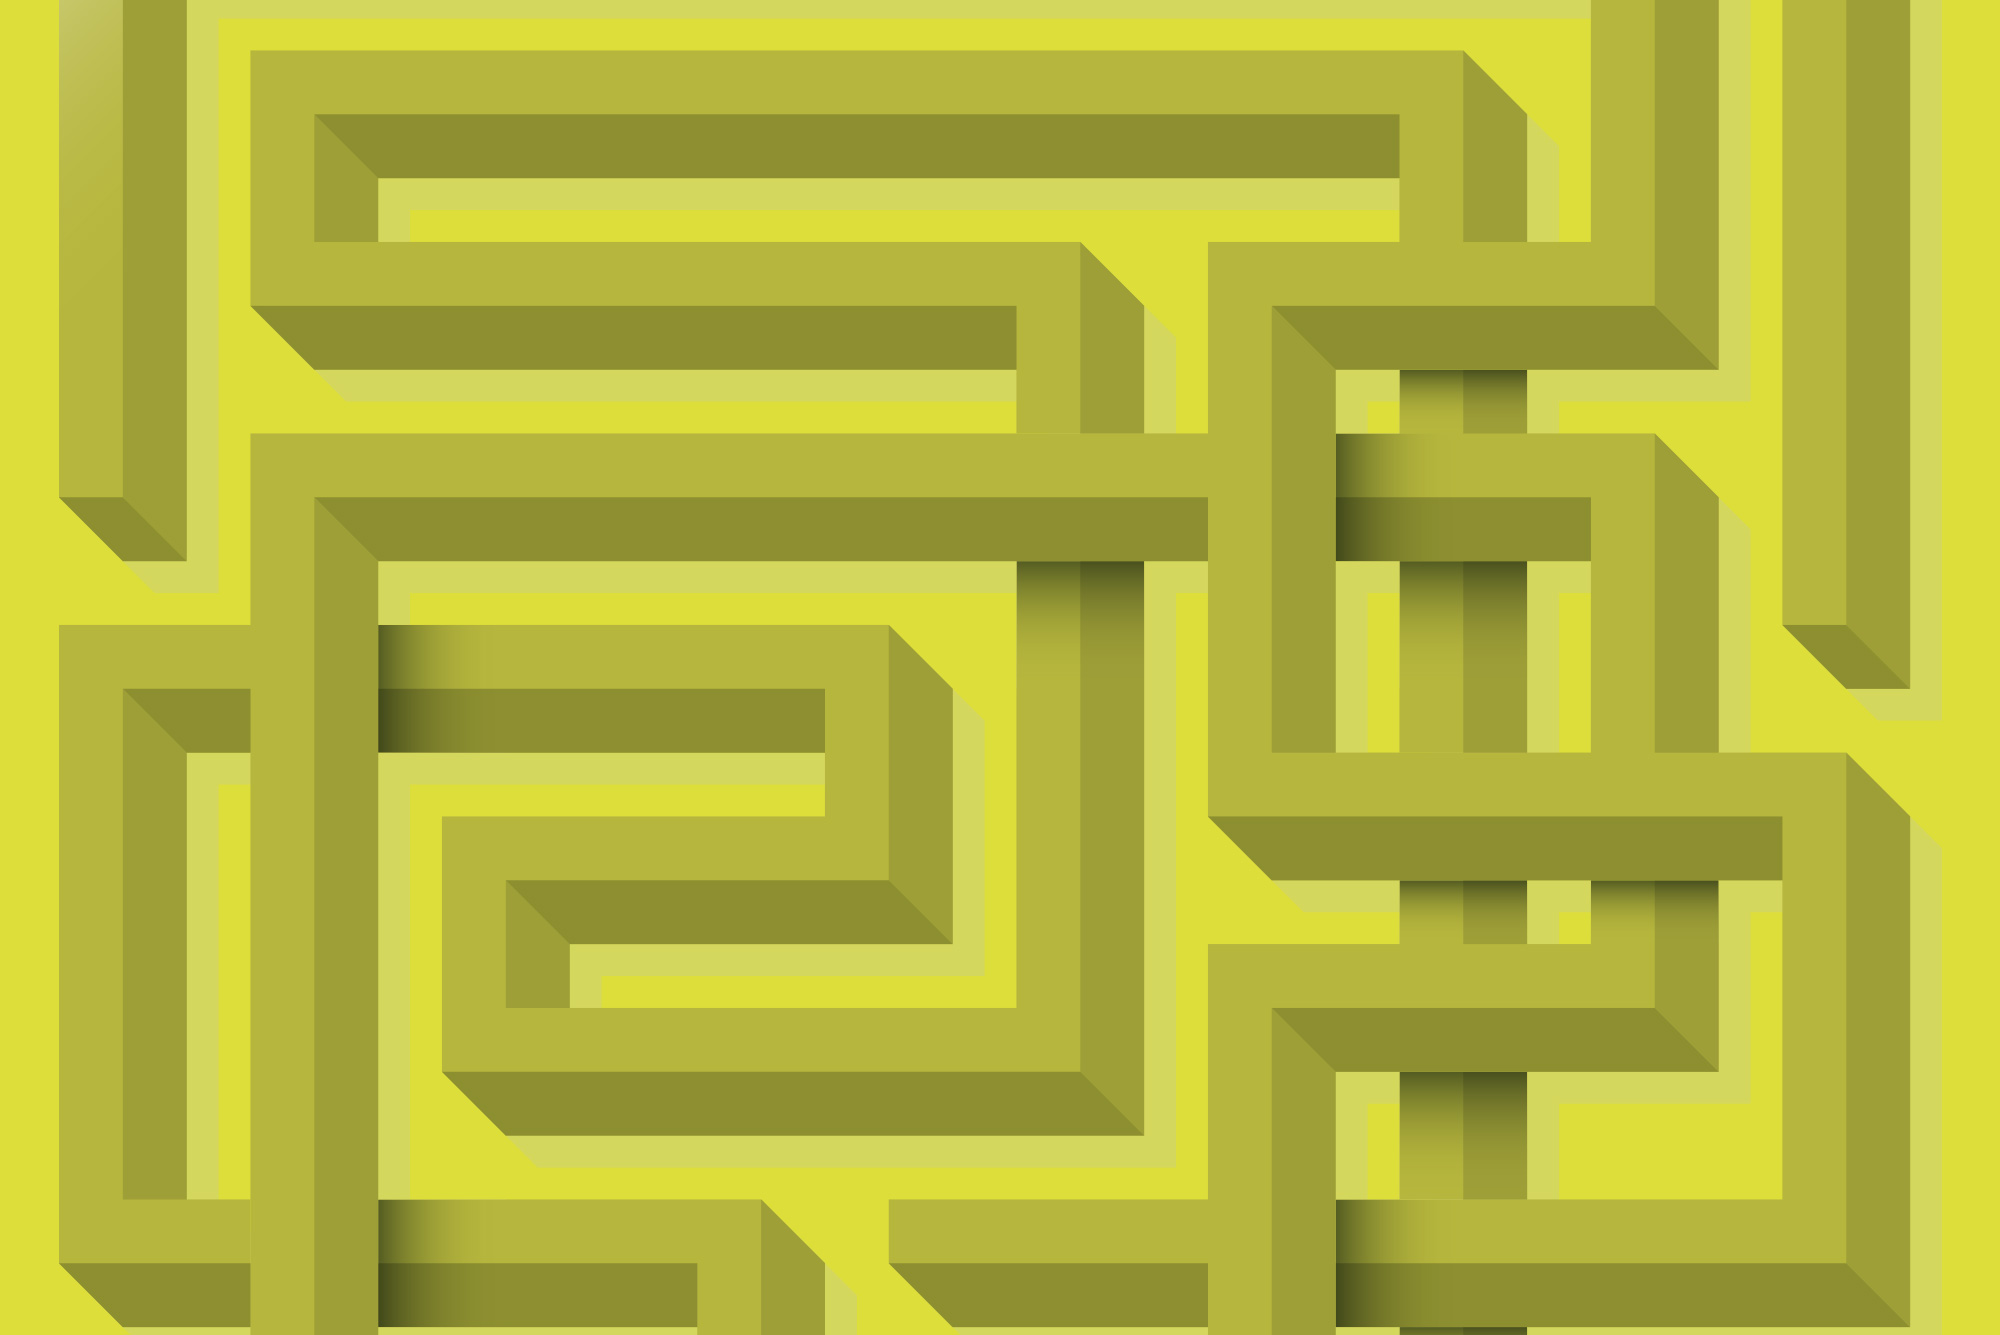 Pattern on yellow background - Fantastic digital experience